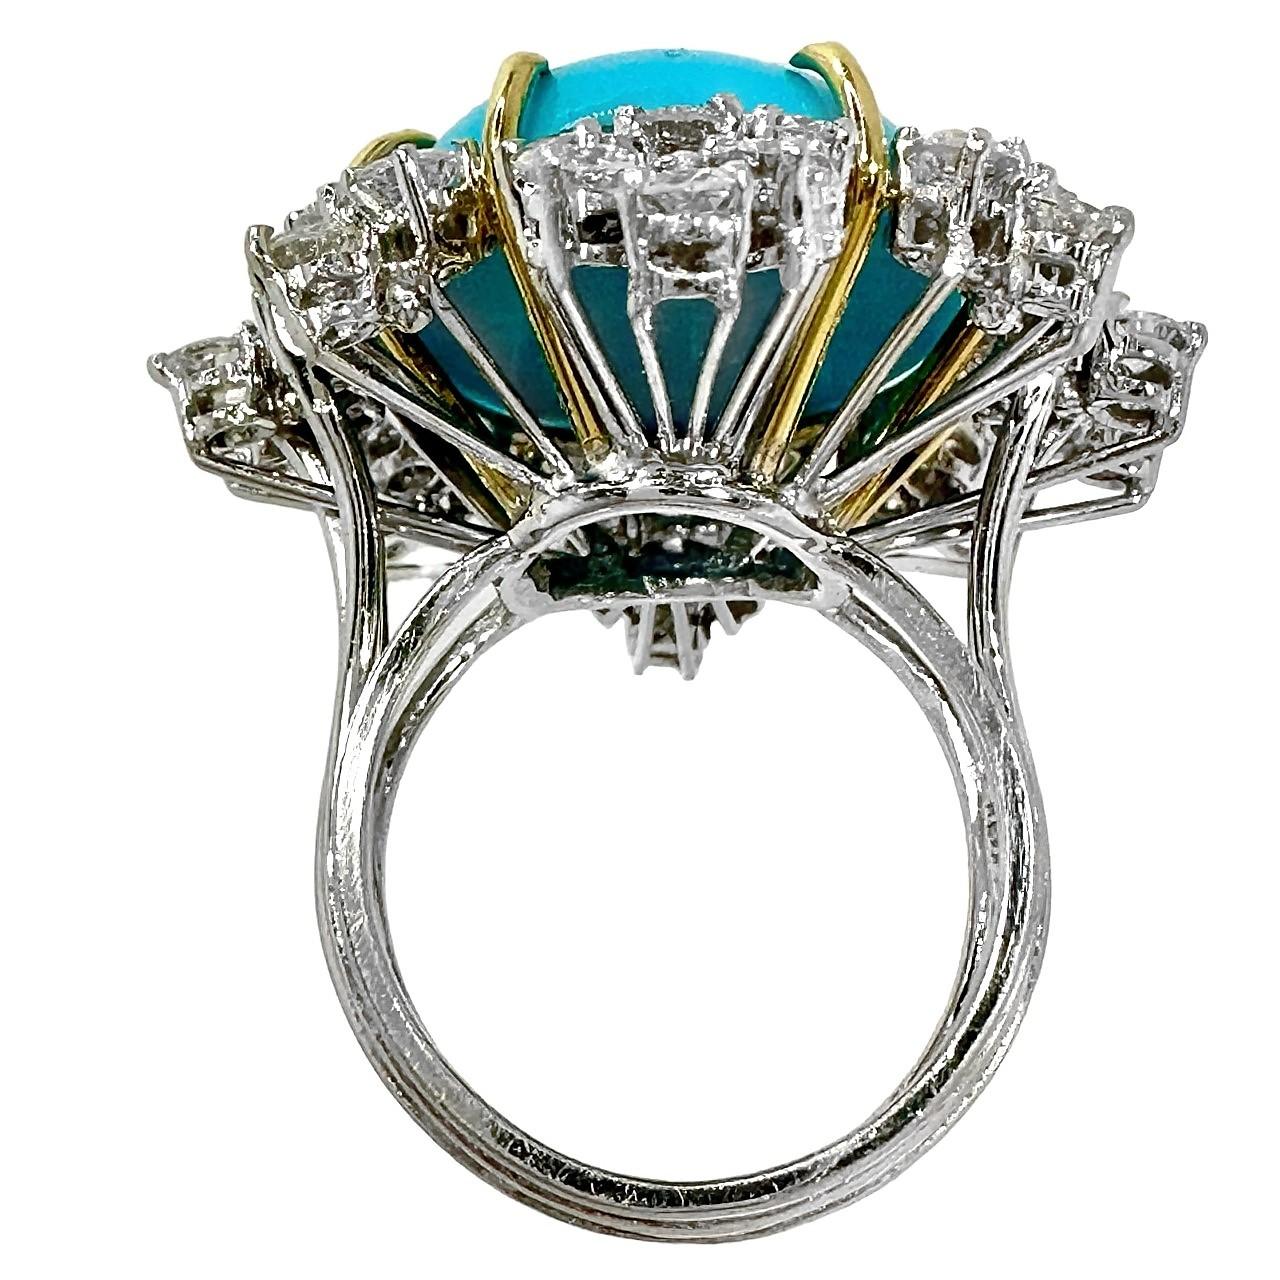 Magnificent Mid-20th Century Turquoise, Diamond and Platinum Cocktail Ring In Good Condition For Sale In Palm Beach, FL